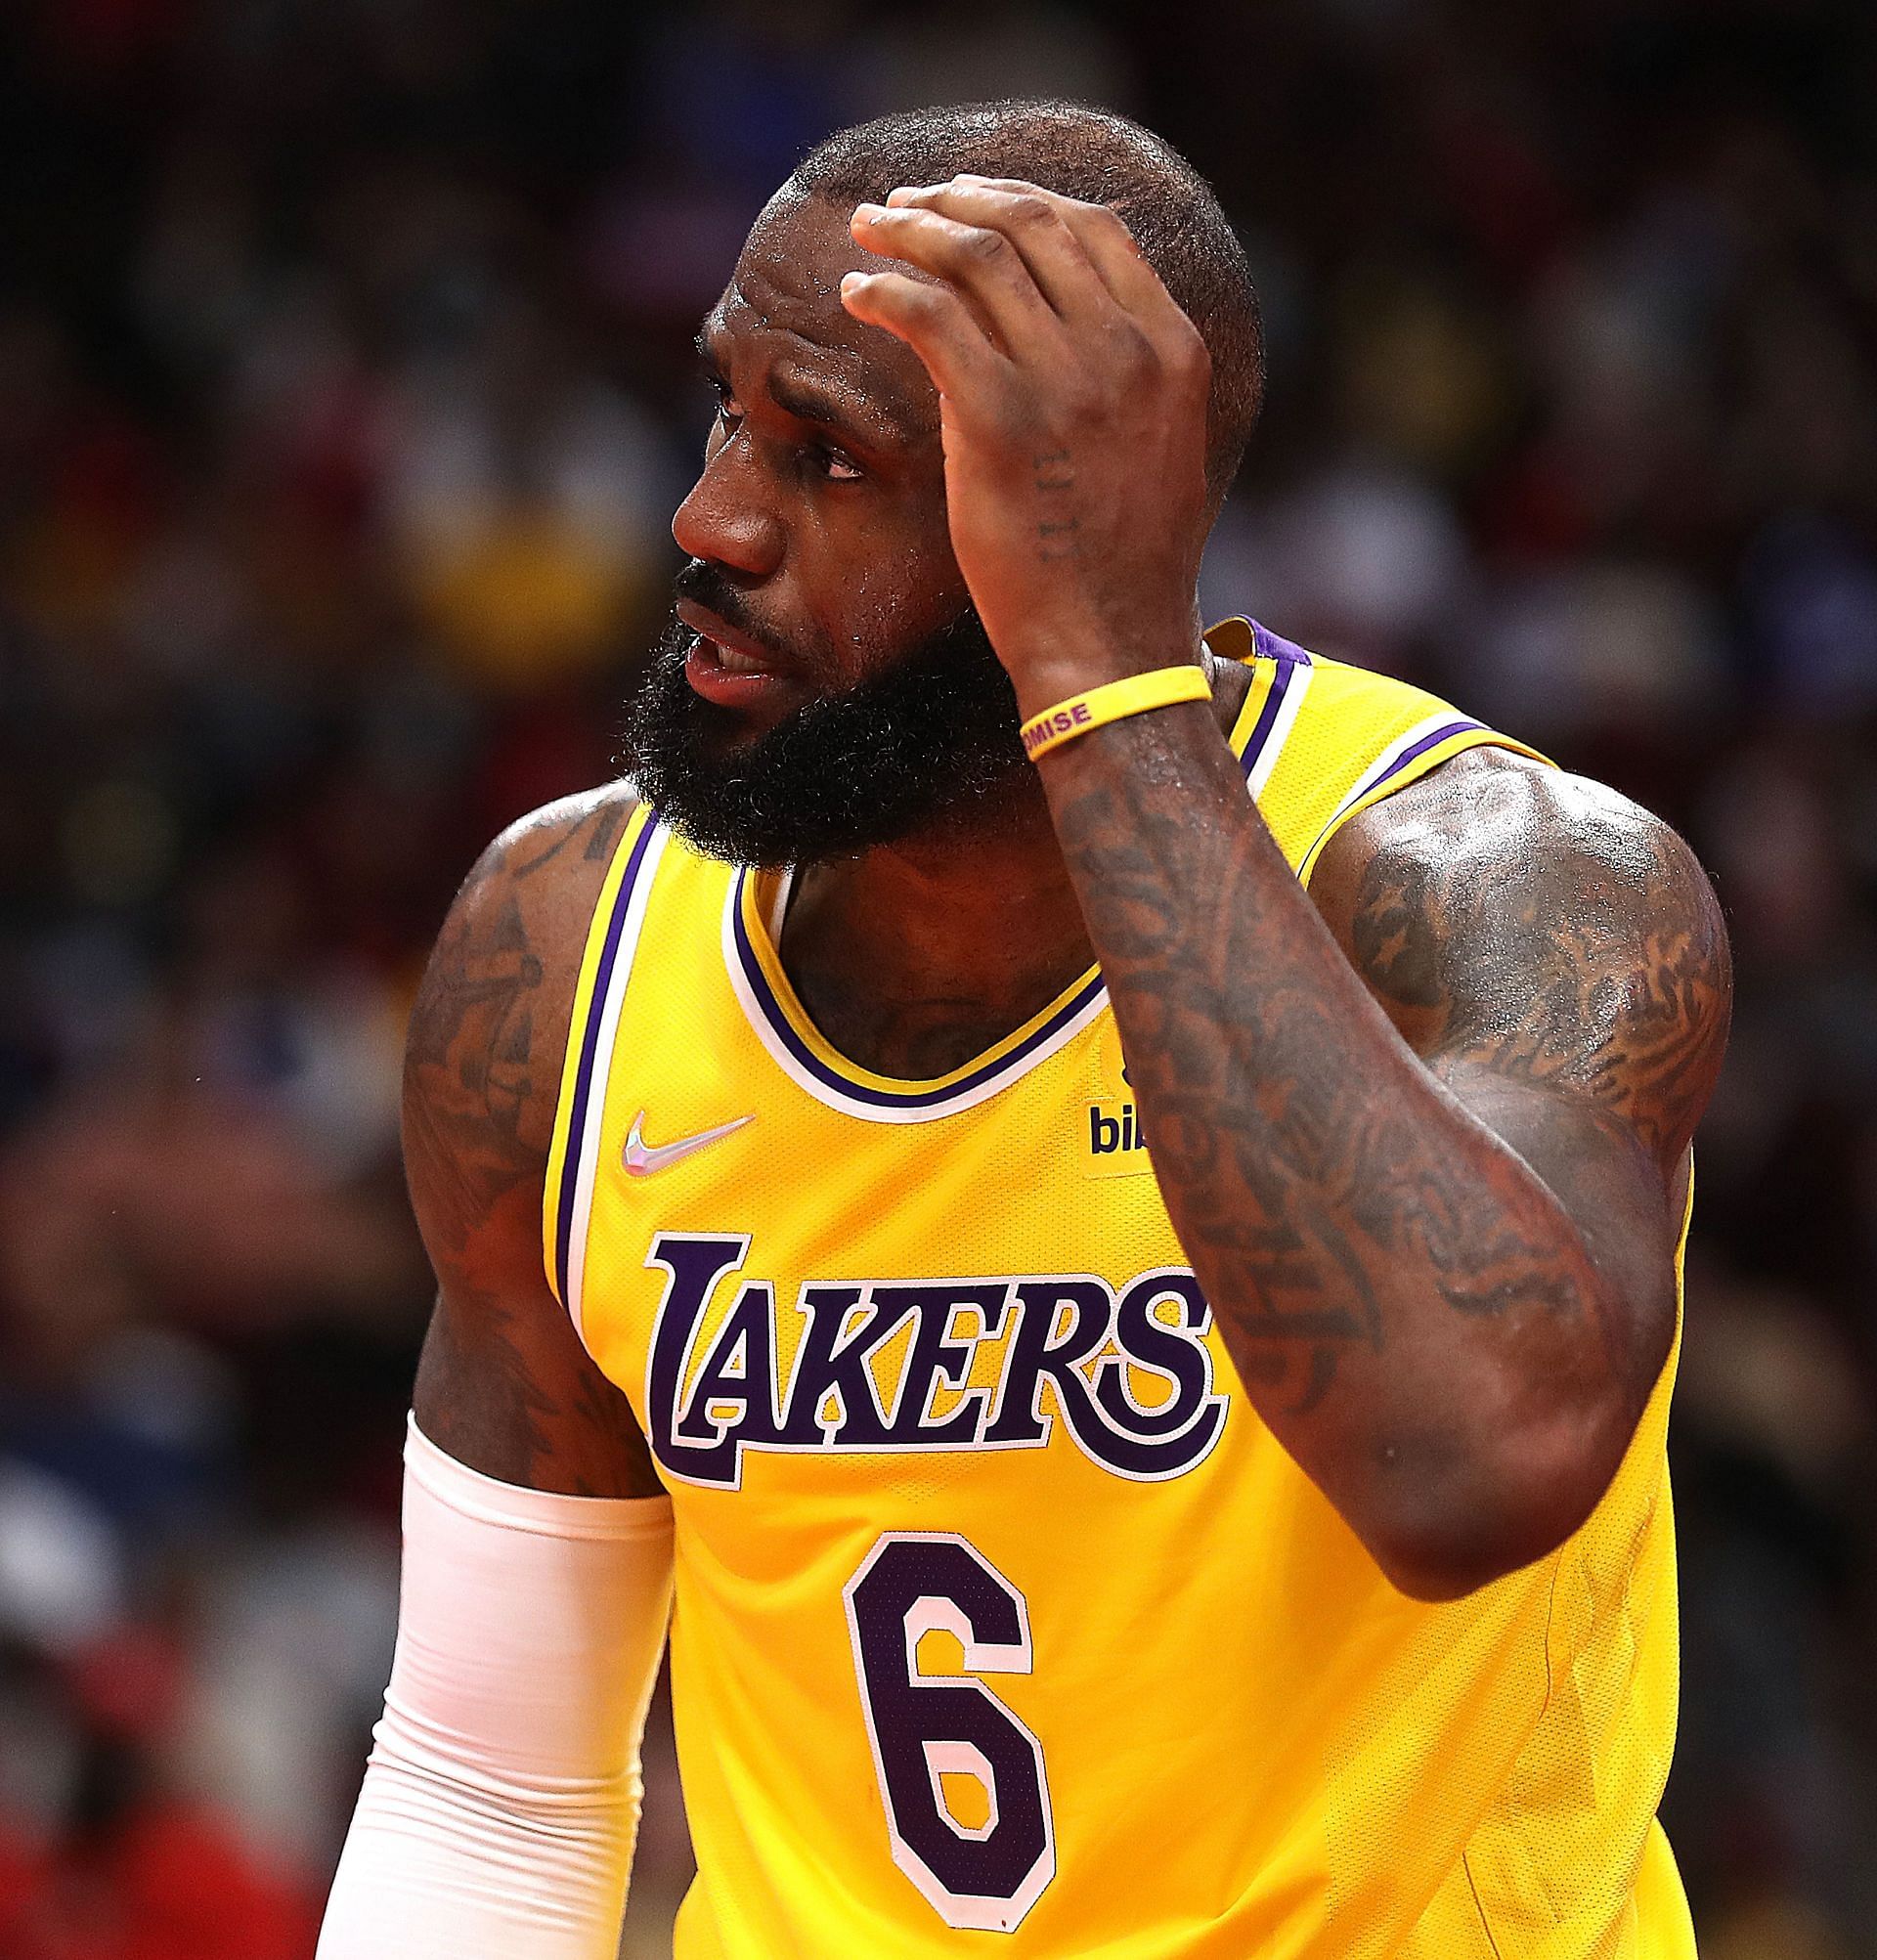 LeBron James #6 of the Los Angeles Lakers hold his head after he was hit going to the basket against the Houston Rockets during the fourth quarter at Toyota Center on March 09, 2022 in Houston, Texas.